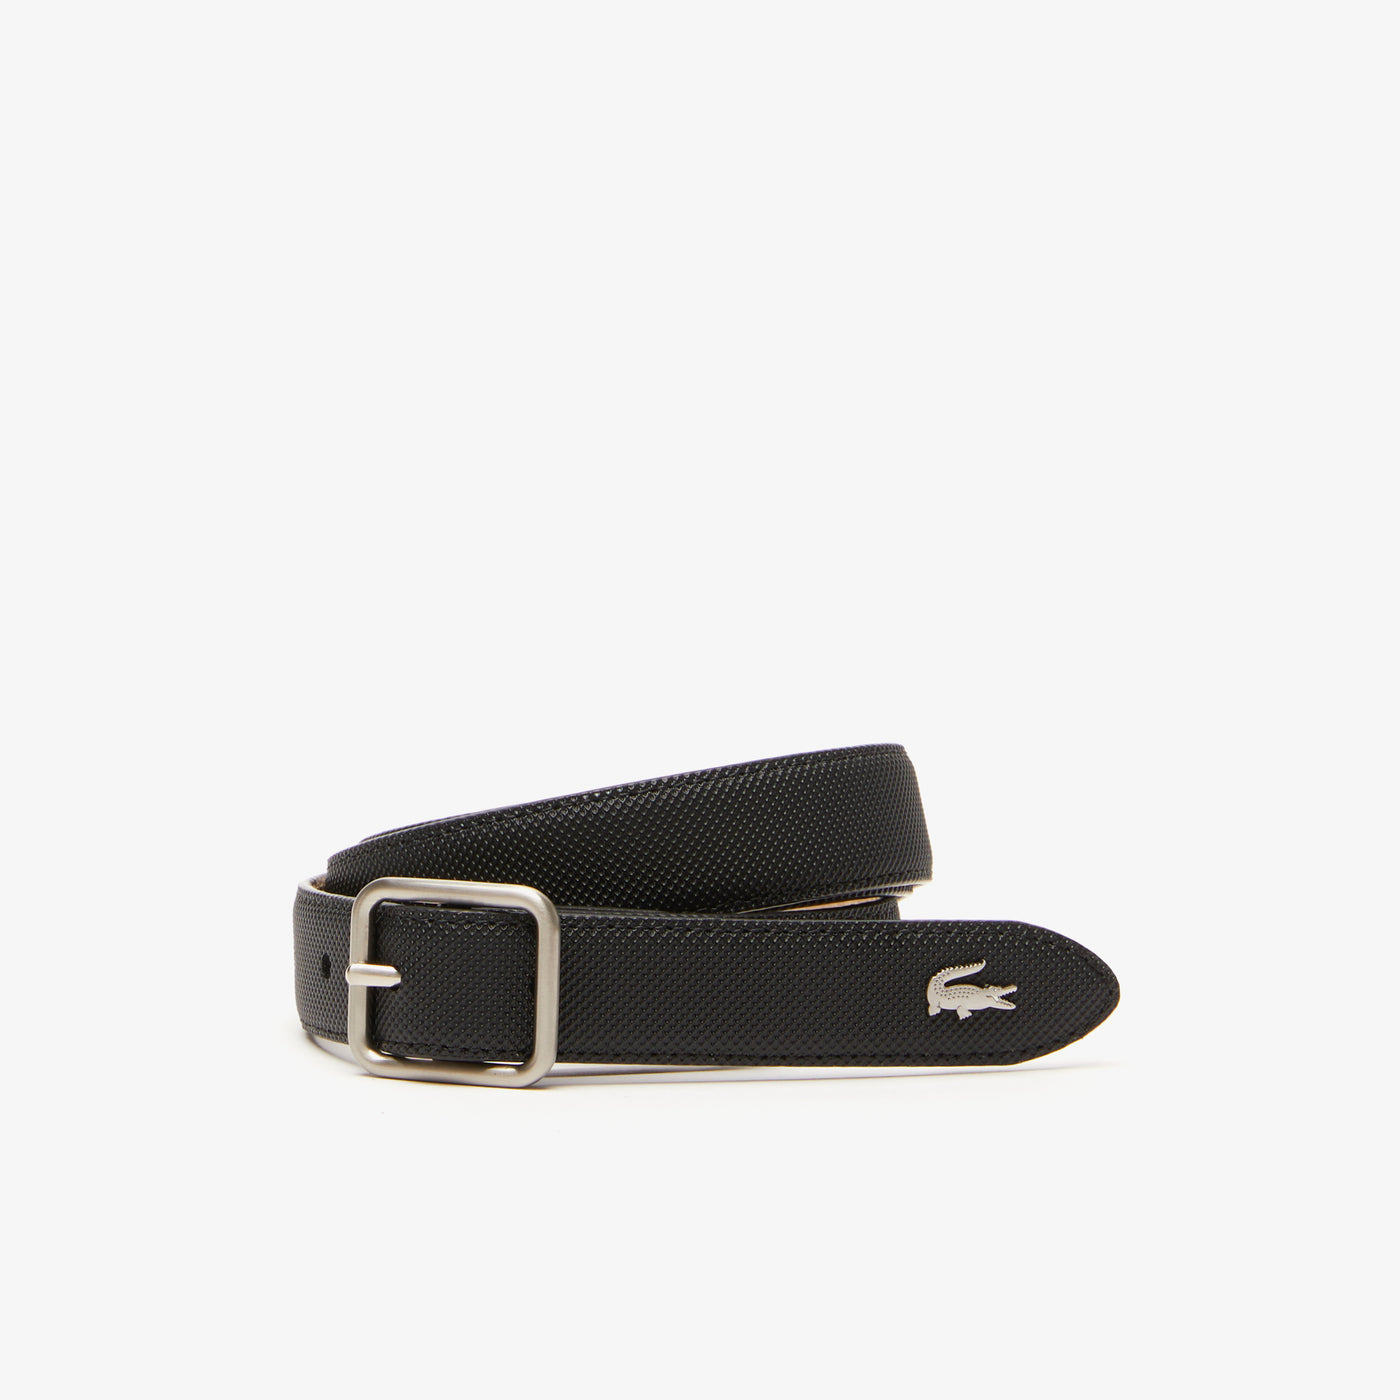 Shop The Latest Collection Of Lacoste Women’S Lacoste Reversible Belt - Rc4066 In Lebanon